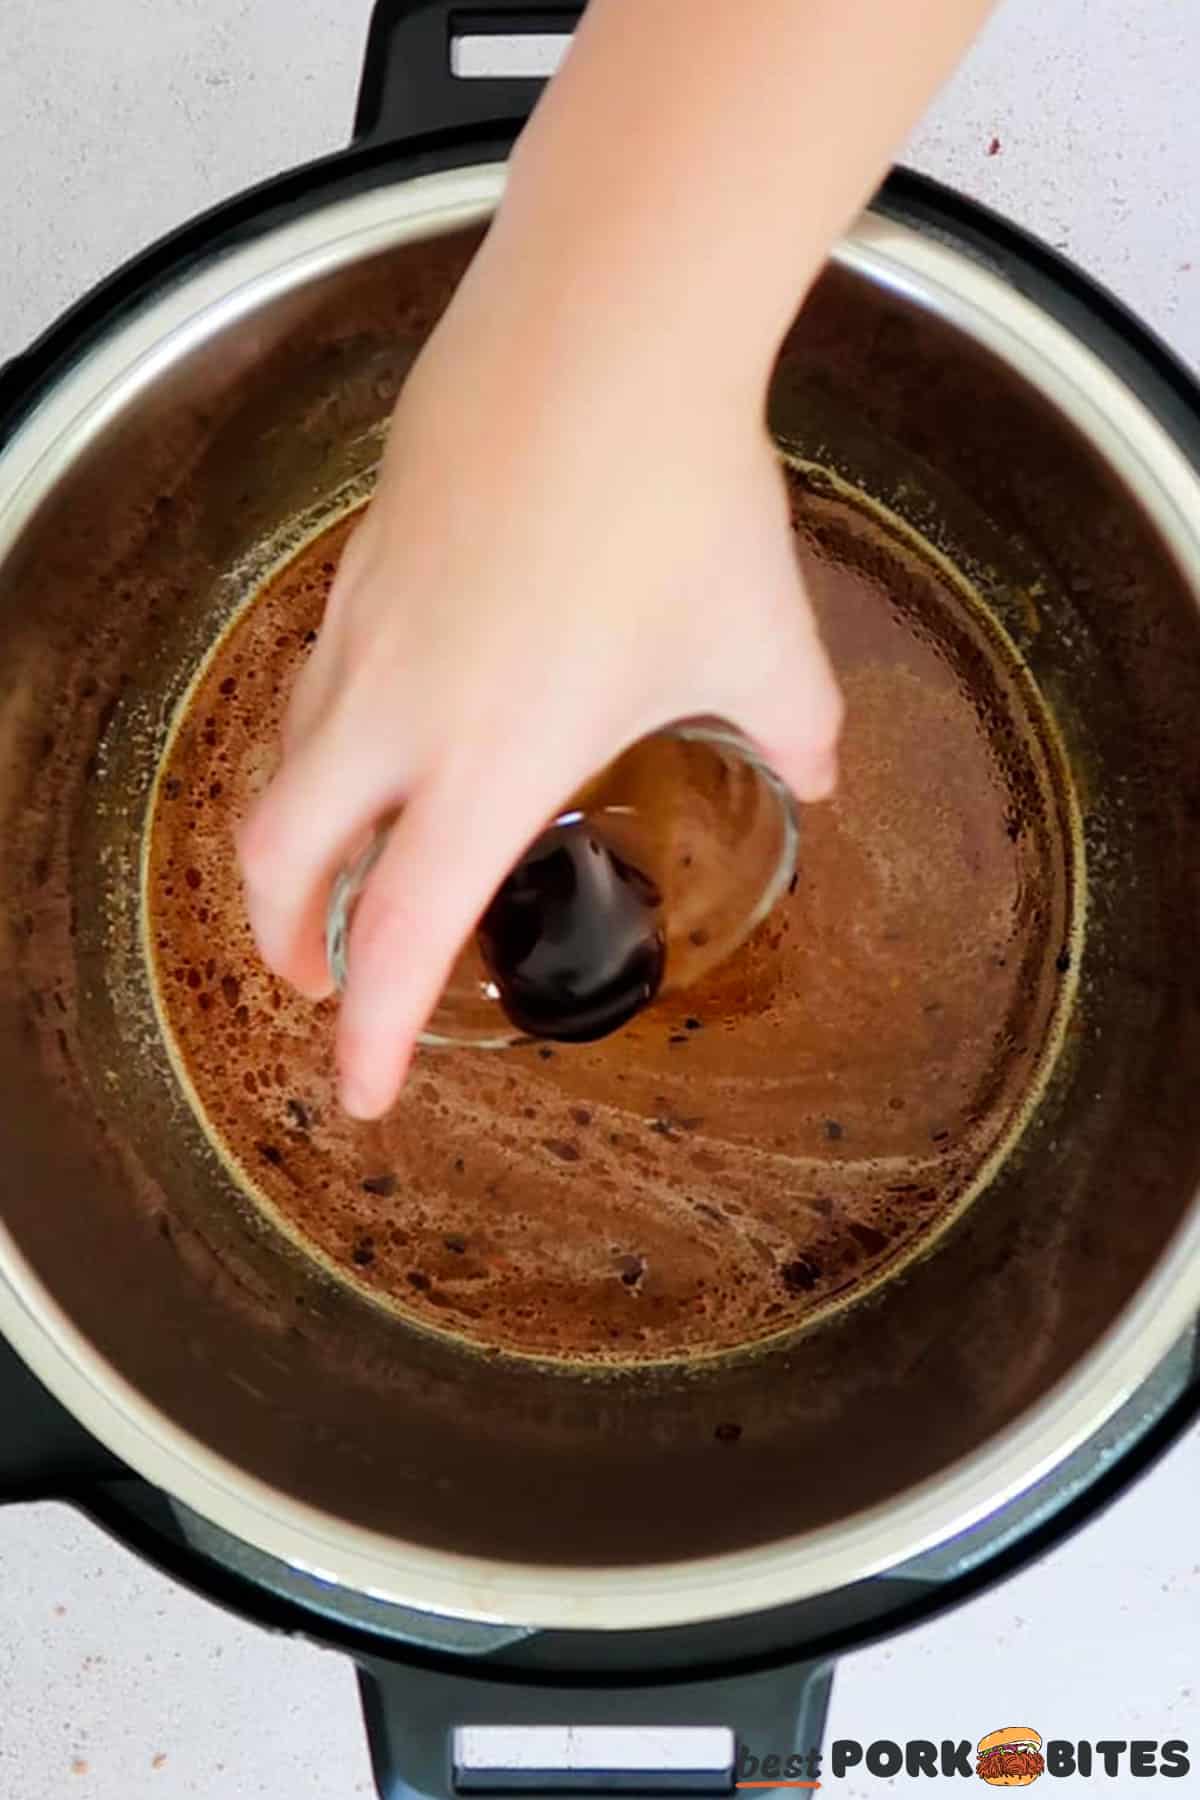 worcestershire sauce being poured into the pan of a pressure cooker filled with gravy